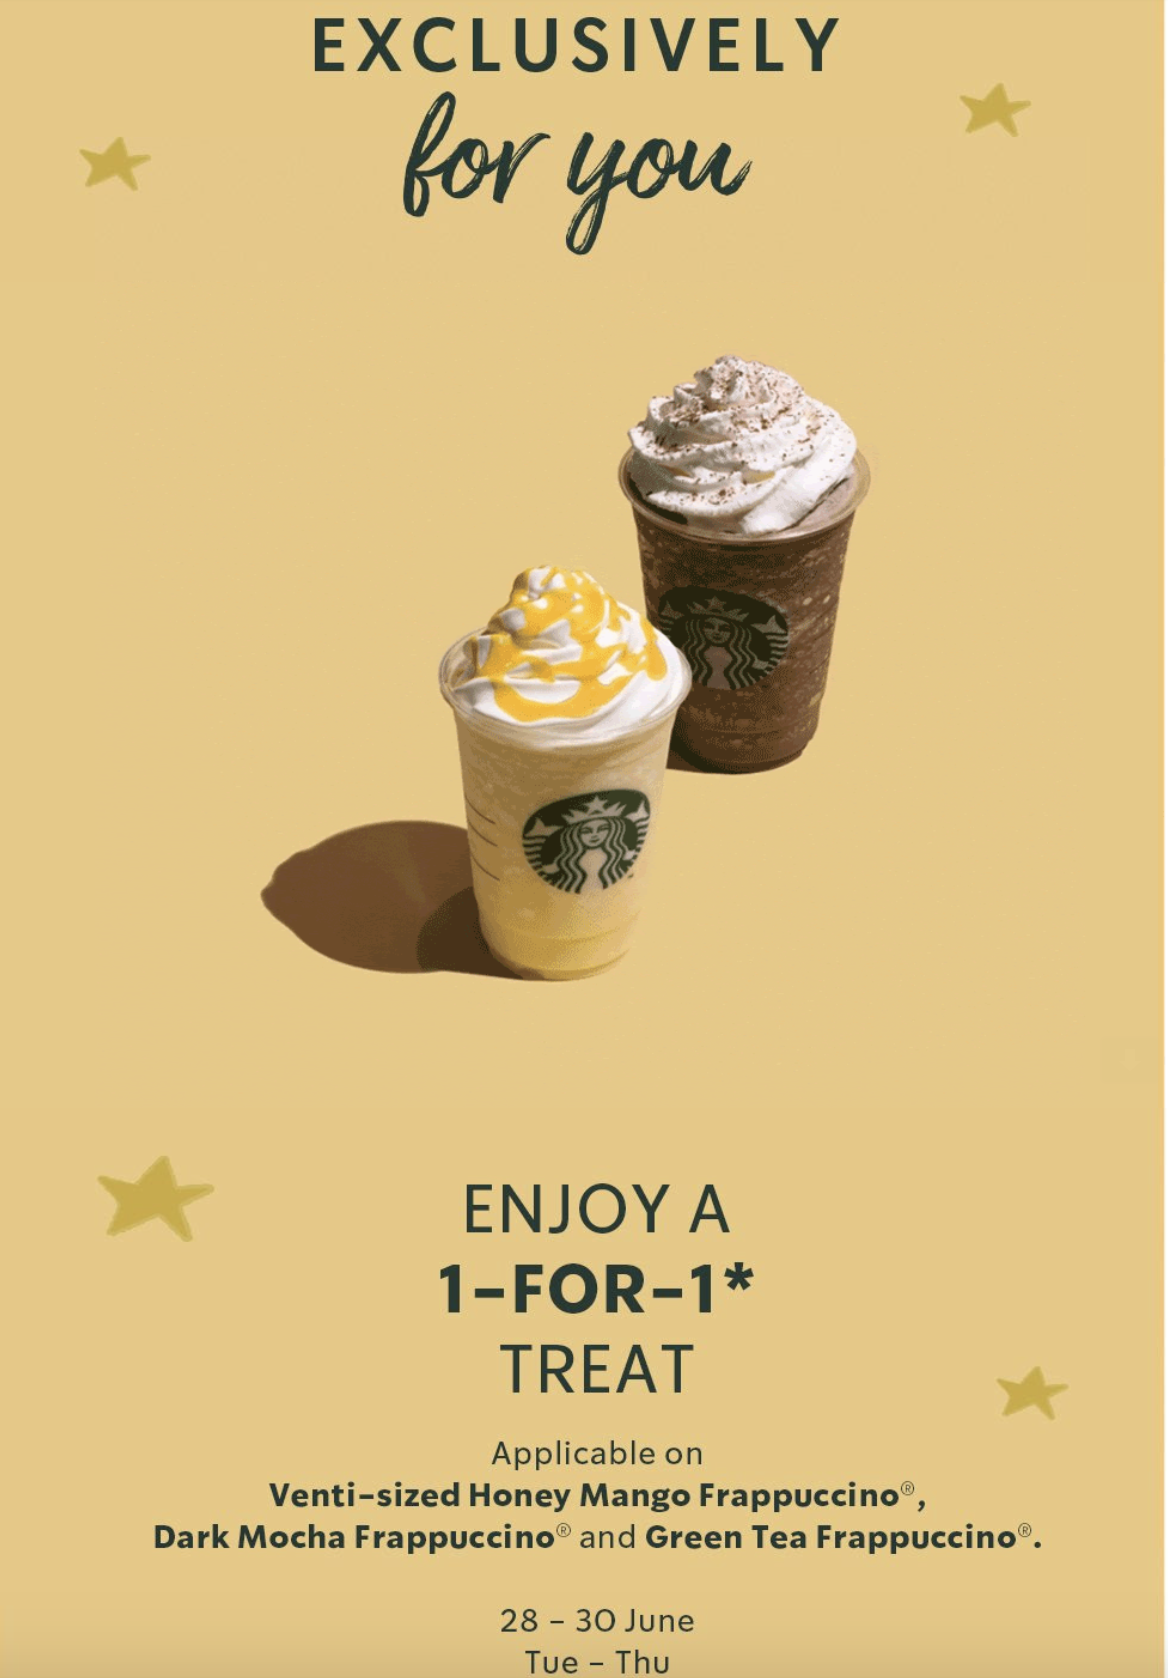 Lobang: Starbucks offering 1-FOR-1 treat on selected beverages from 28 - 30 Jun 22 - 3